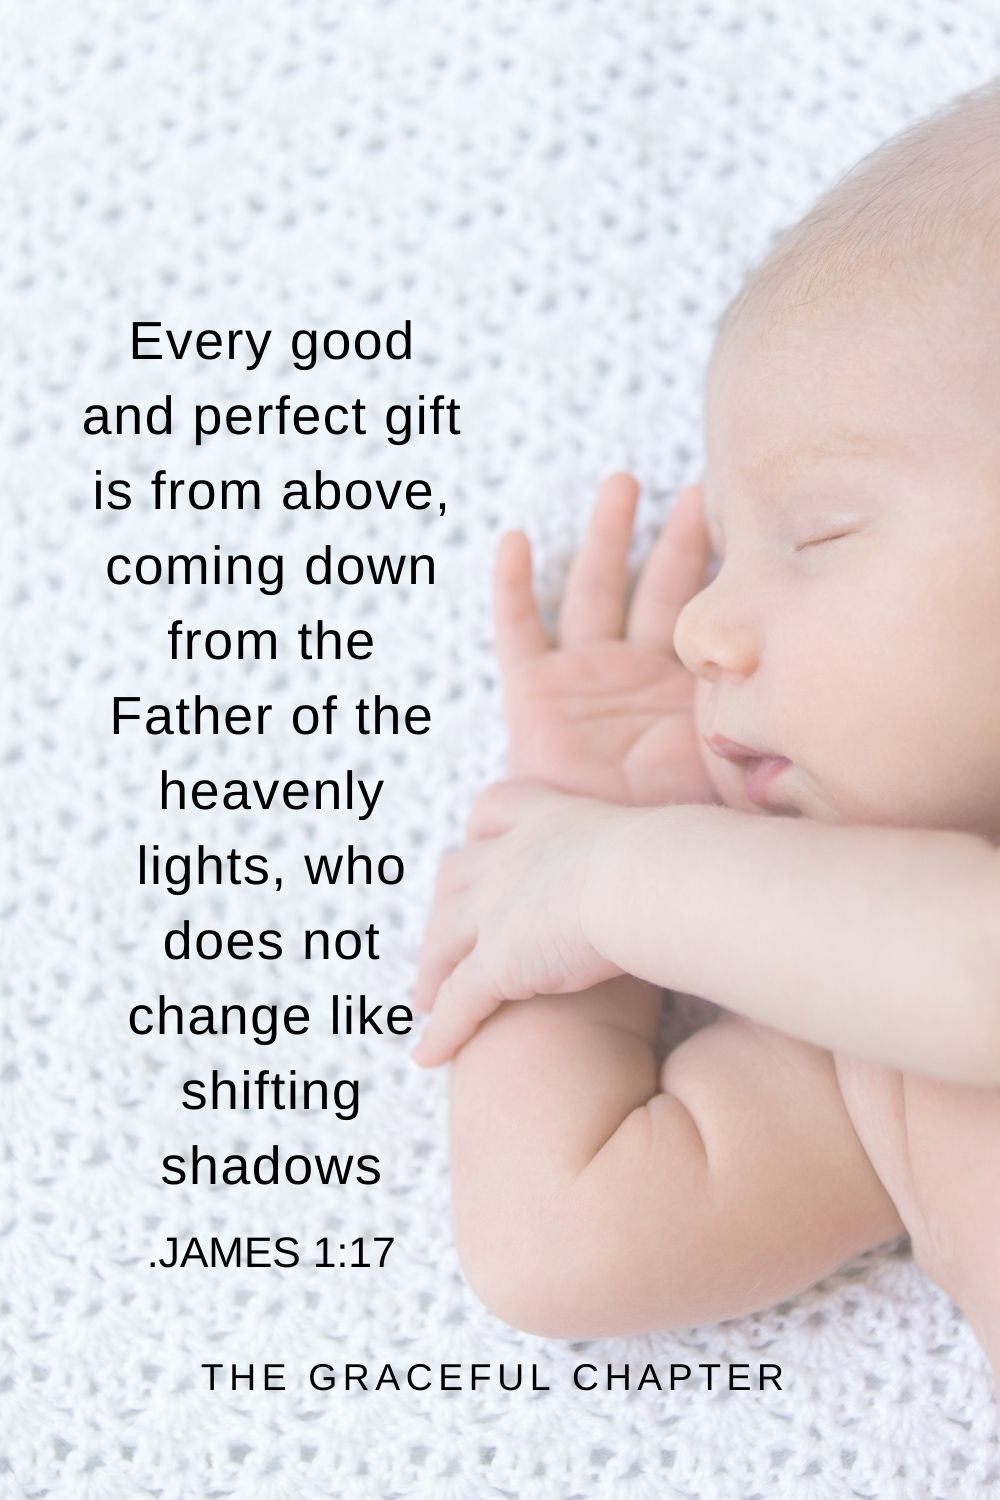 Every good and perfect gift is from above, coming down from the Father of the heavenly lights, who does not change like shifting shadows .James 1:17